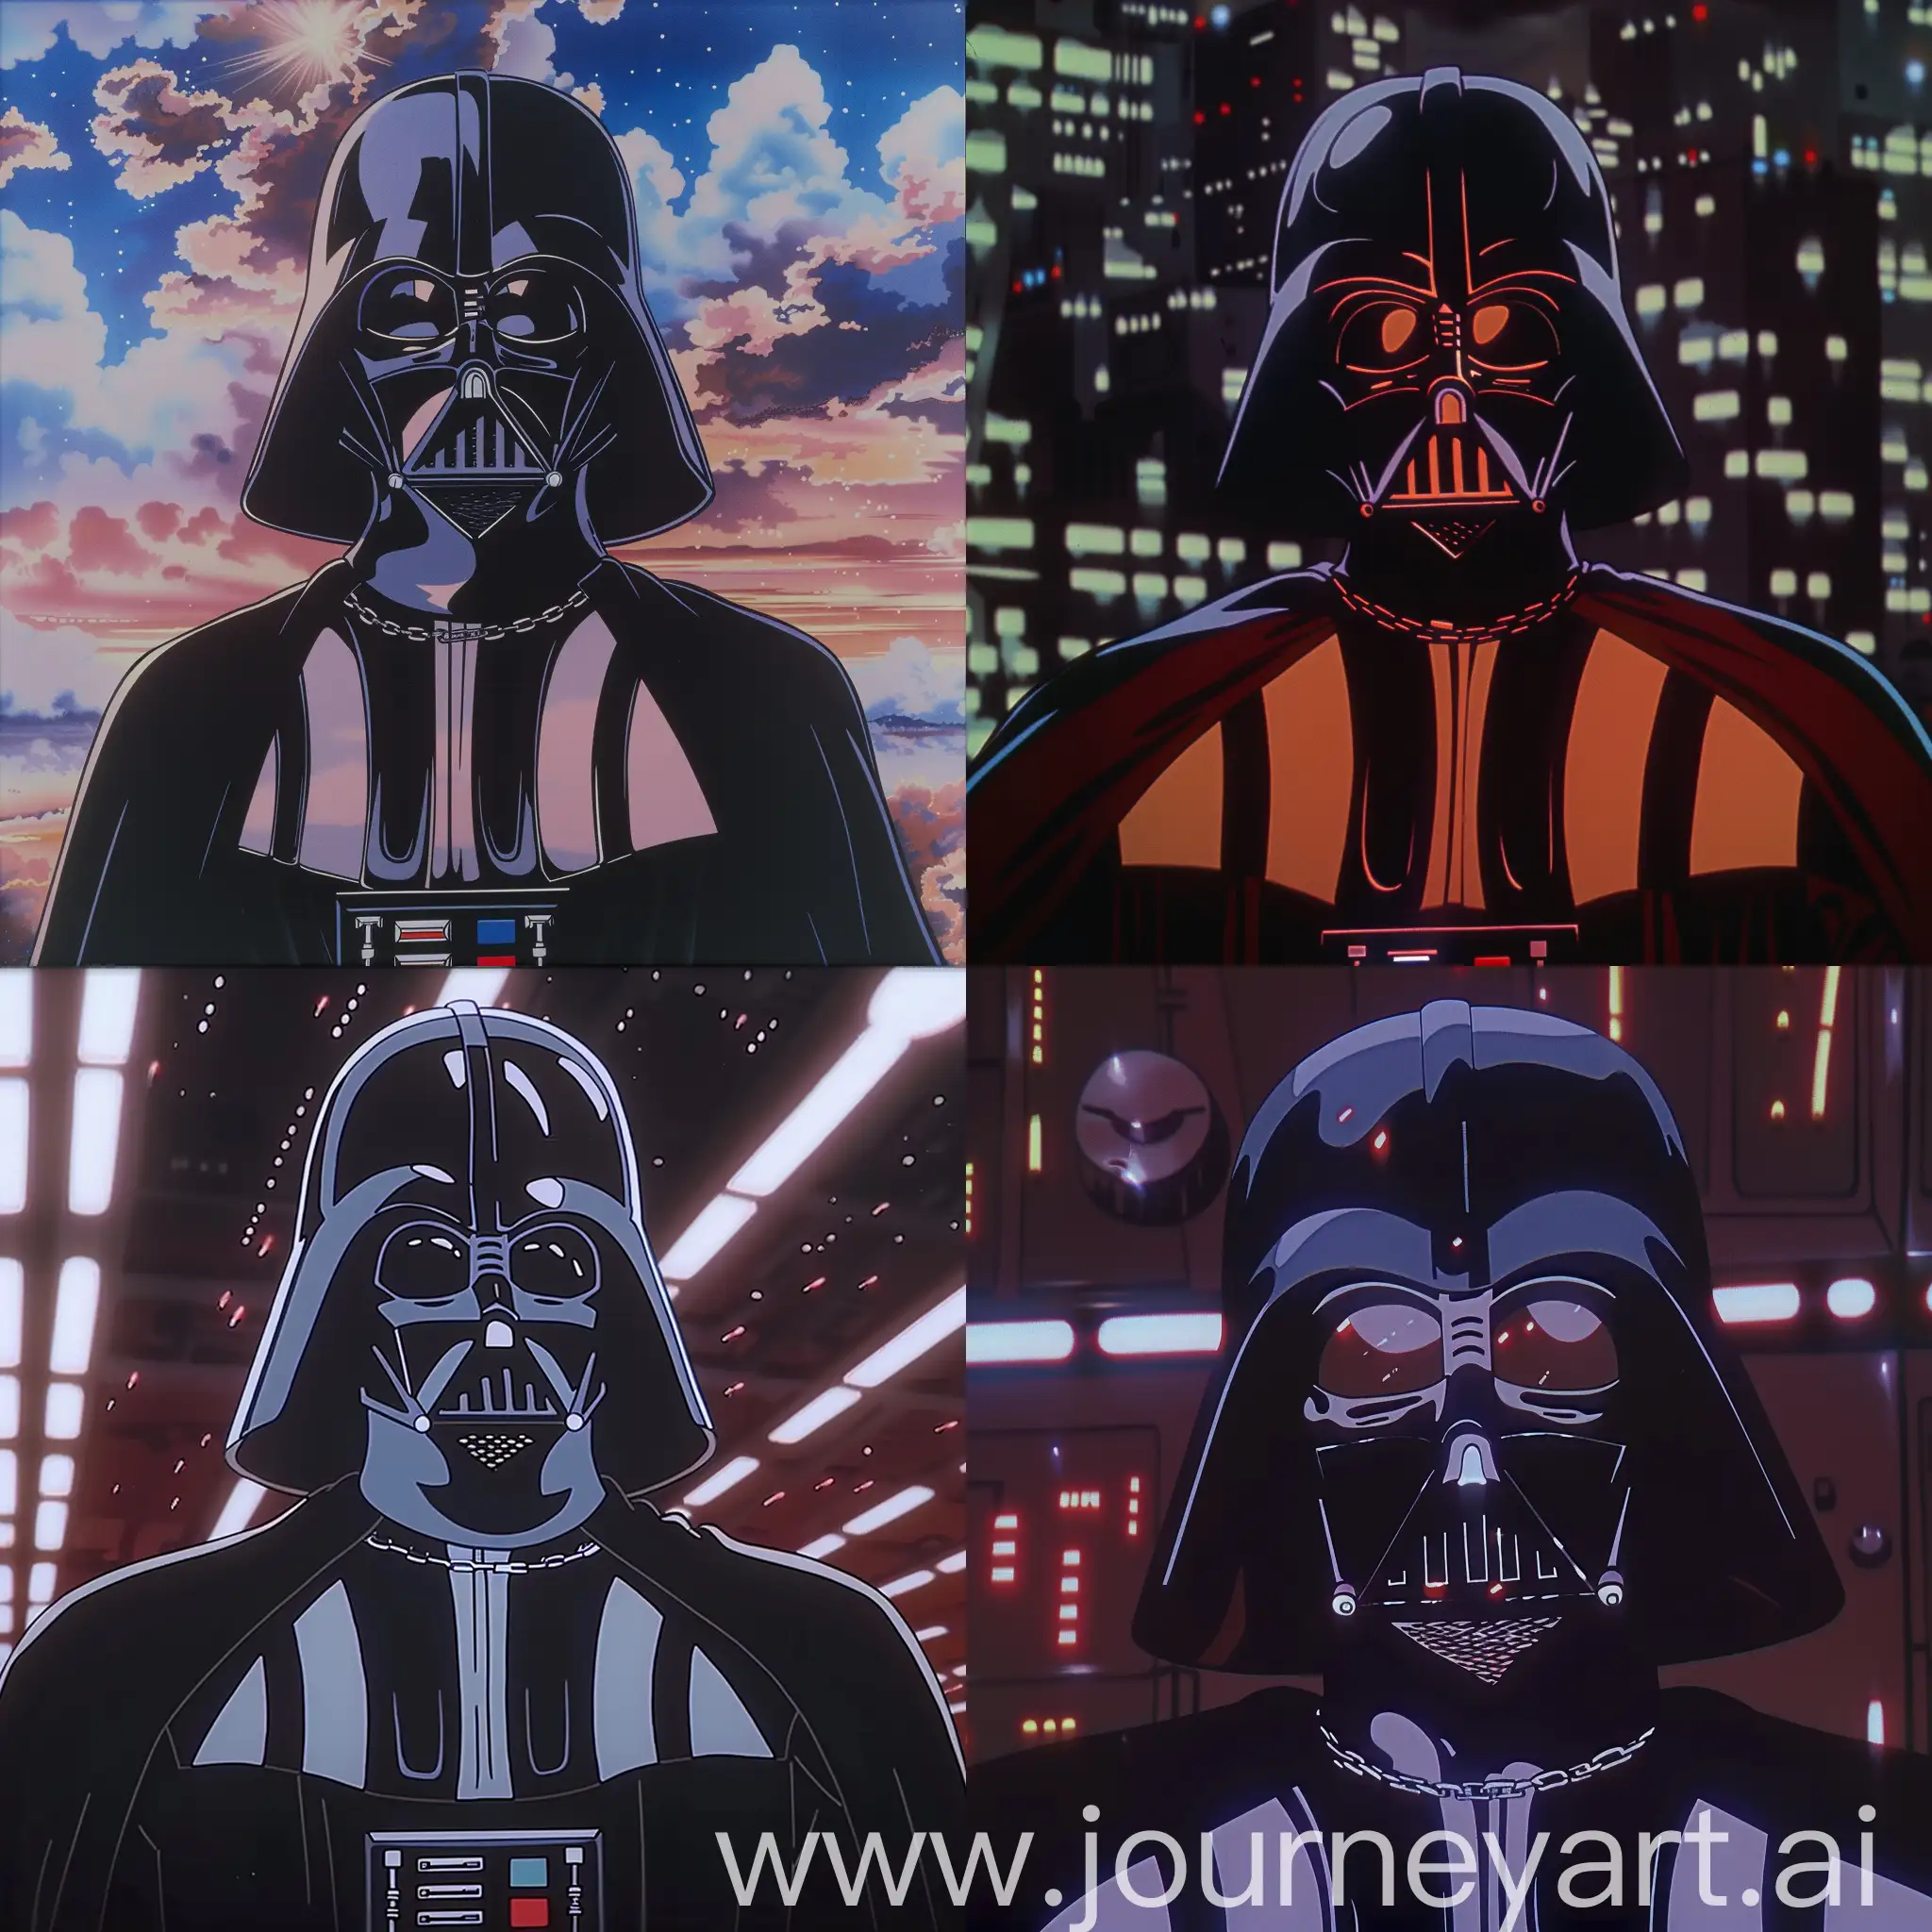 Darth-Vader-Anime-Portrait-80s-Film-Scene-with-Hell-Costume